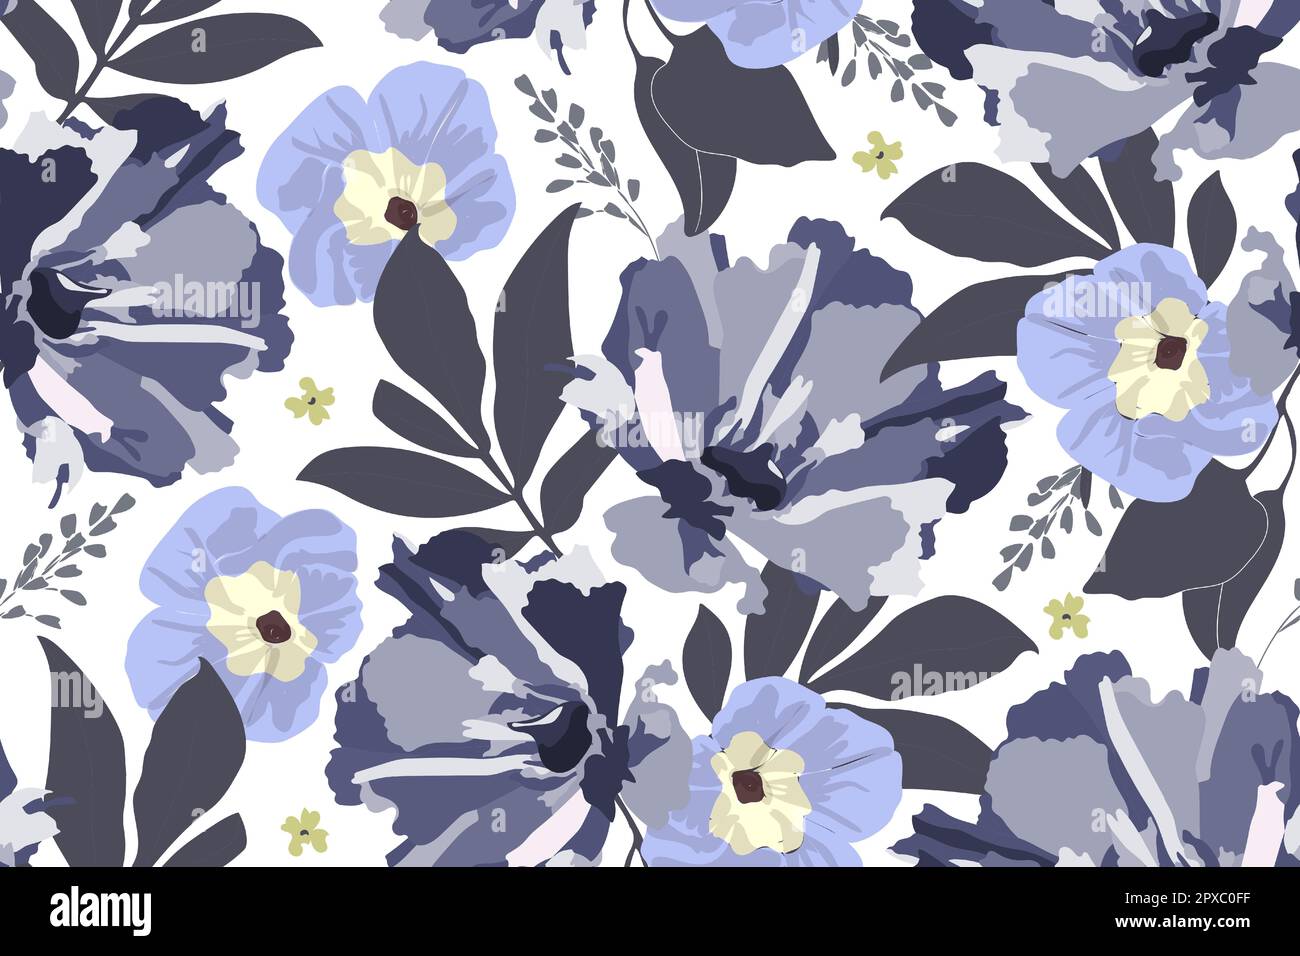 Floral vector seamless pattern. Morning glory, ipomoea. Blue, yellow flowers and leaves Stock Vector